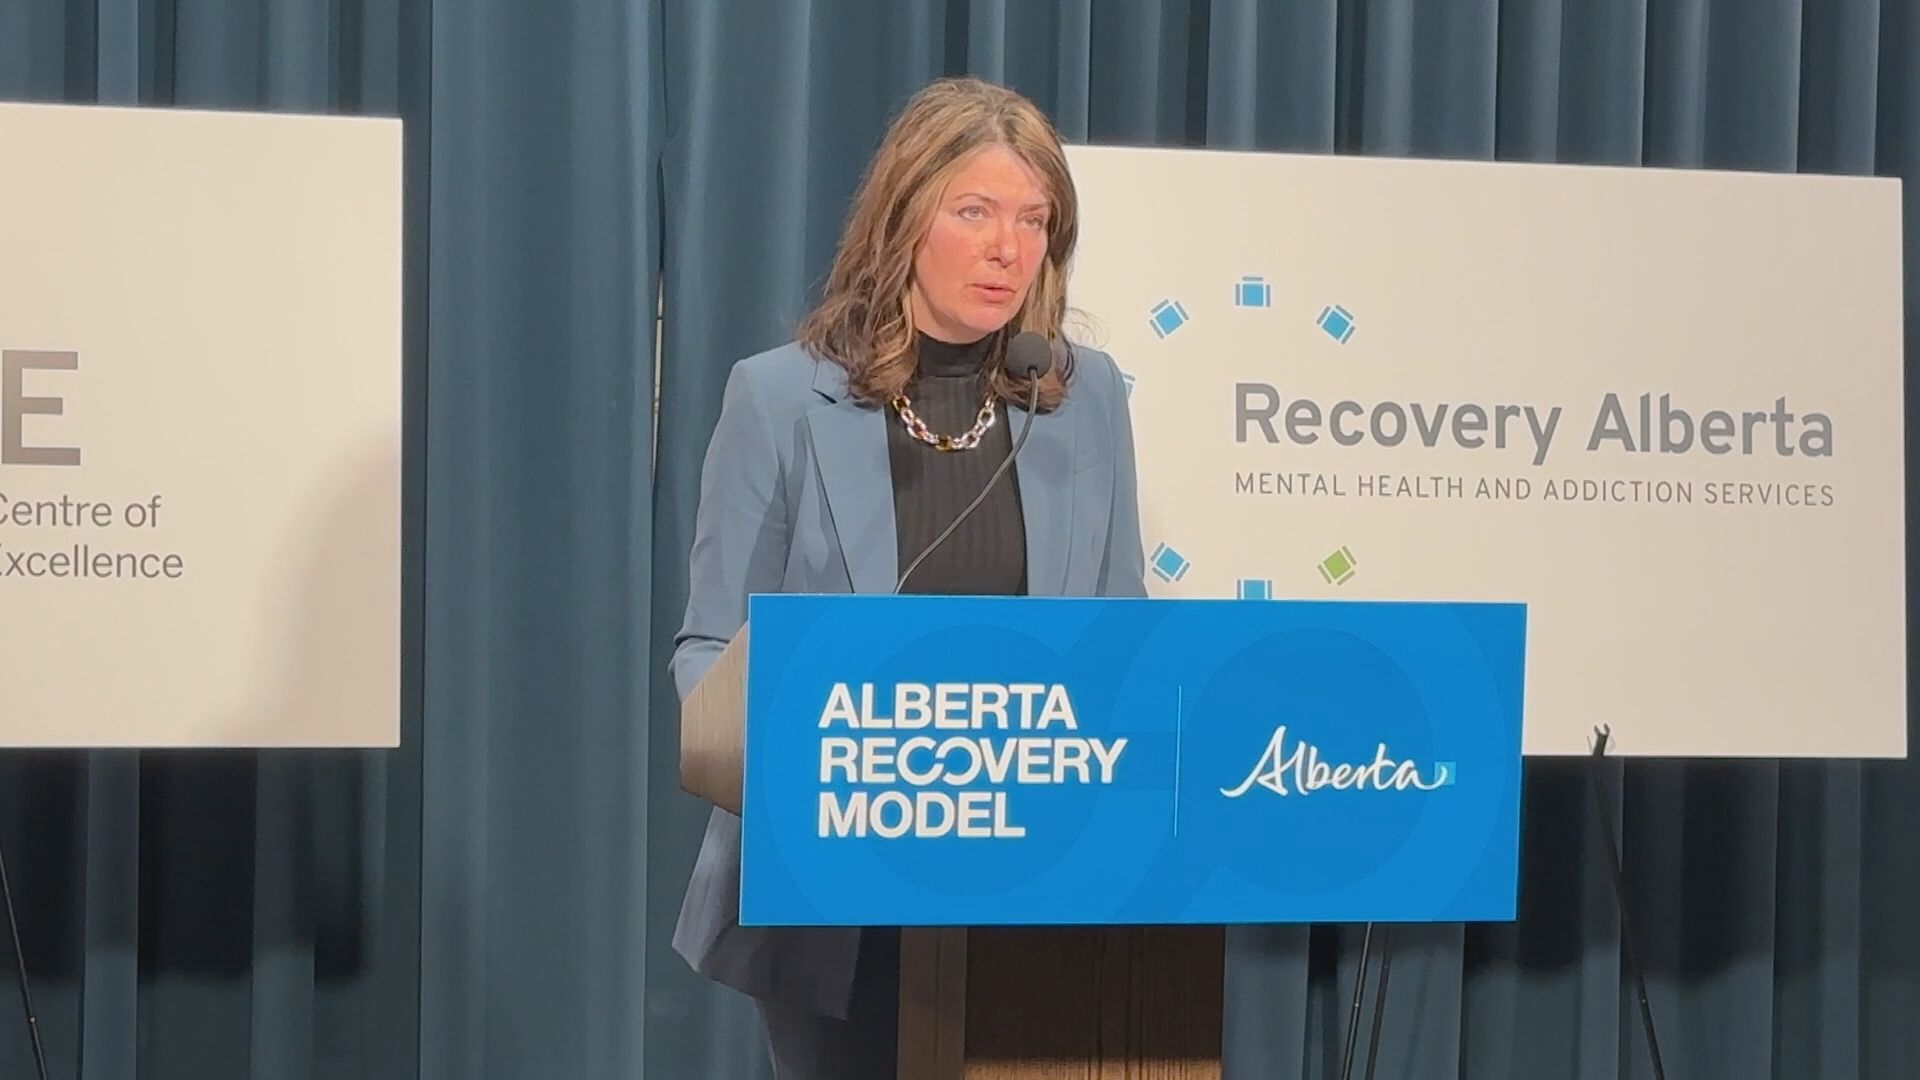 Alberta announces new mental health and addiction services